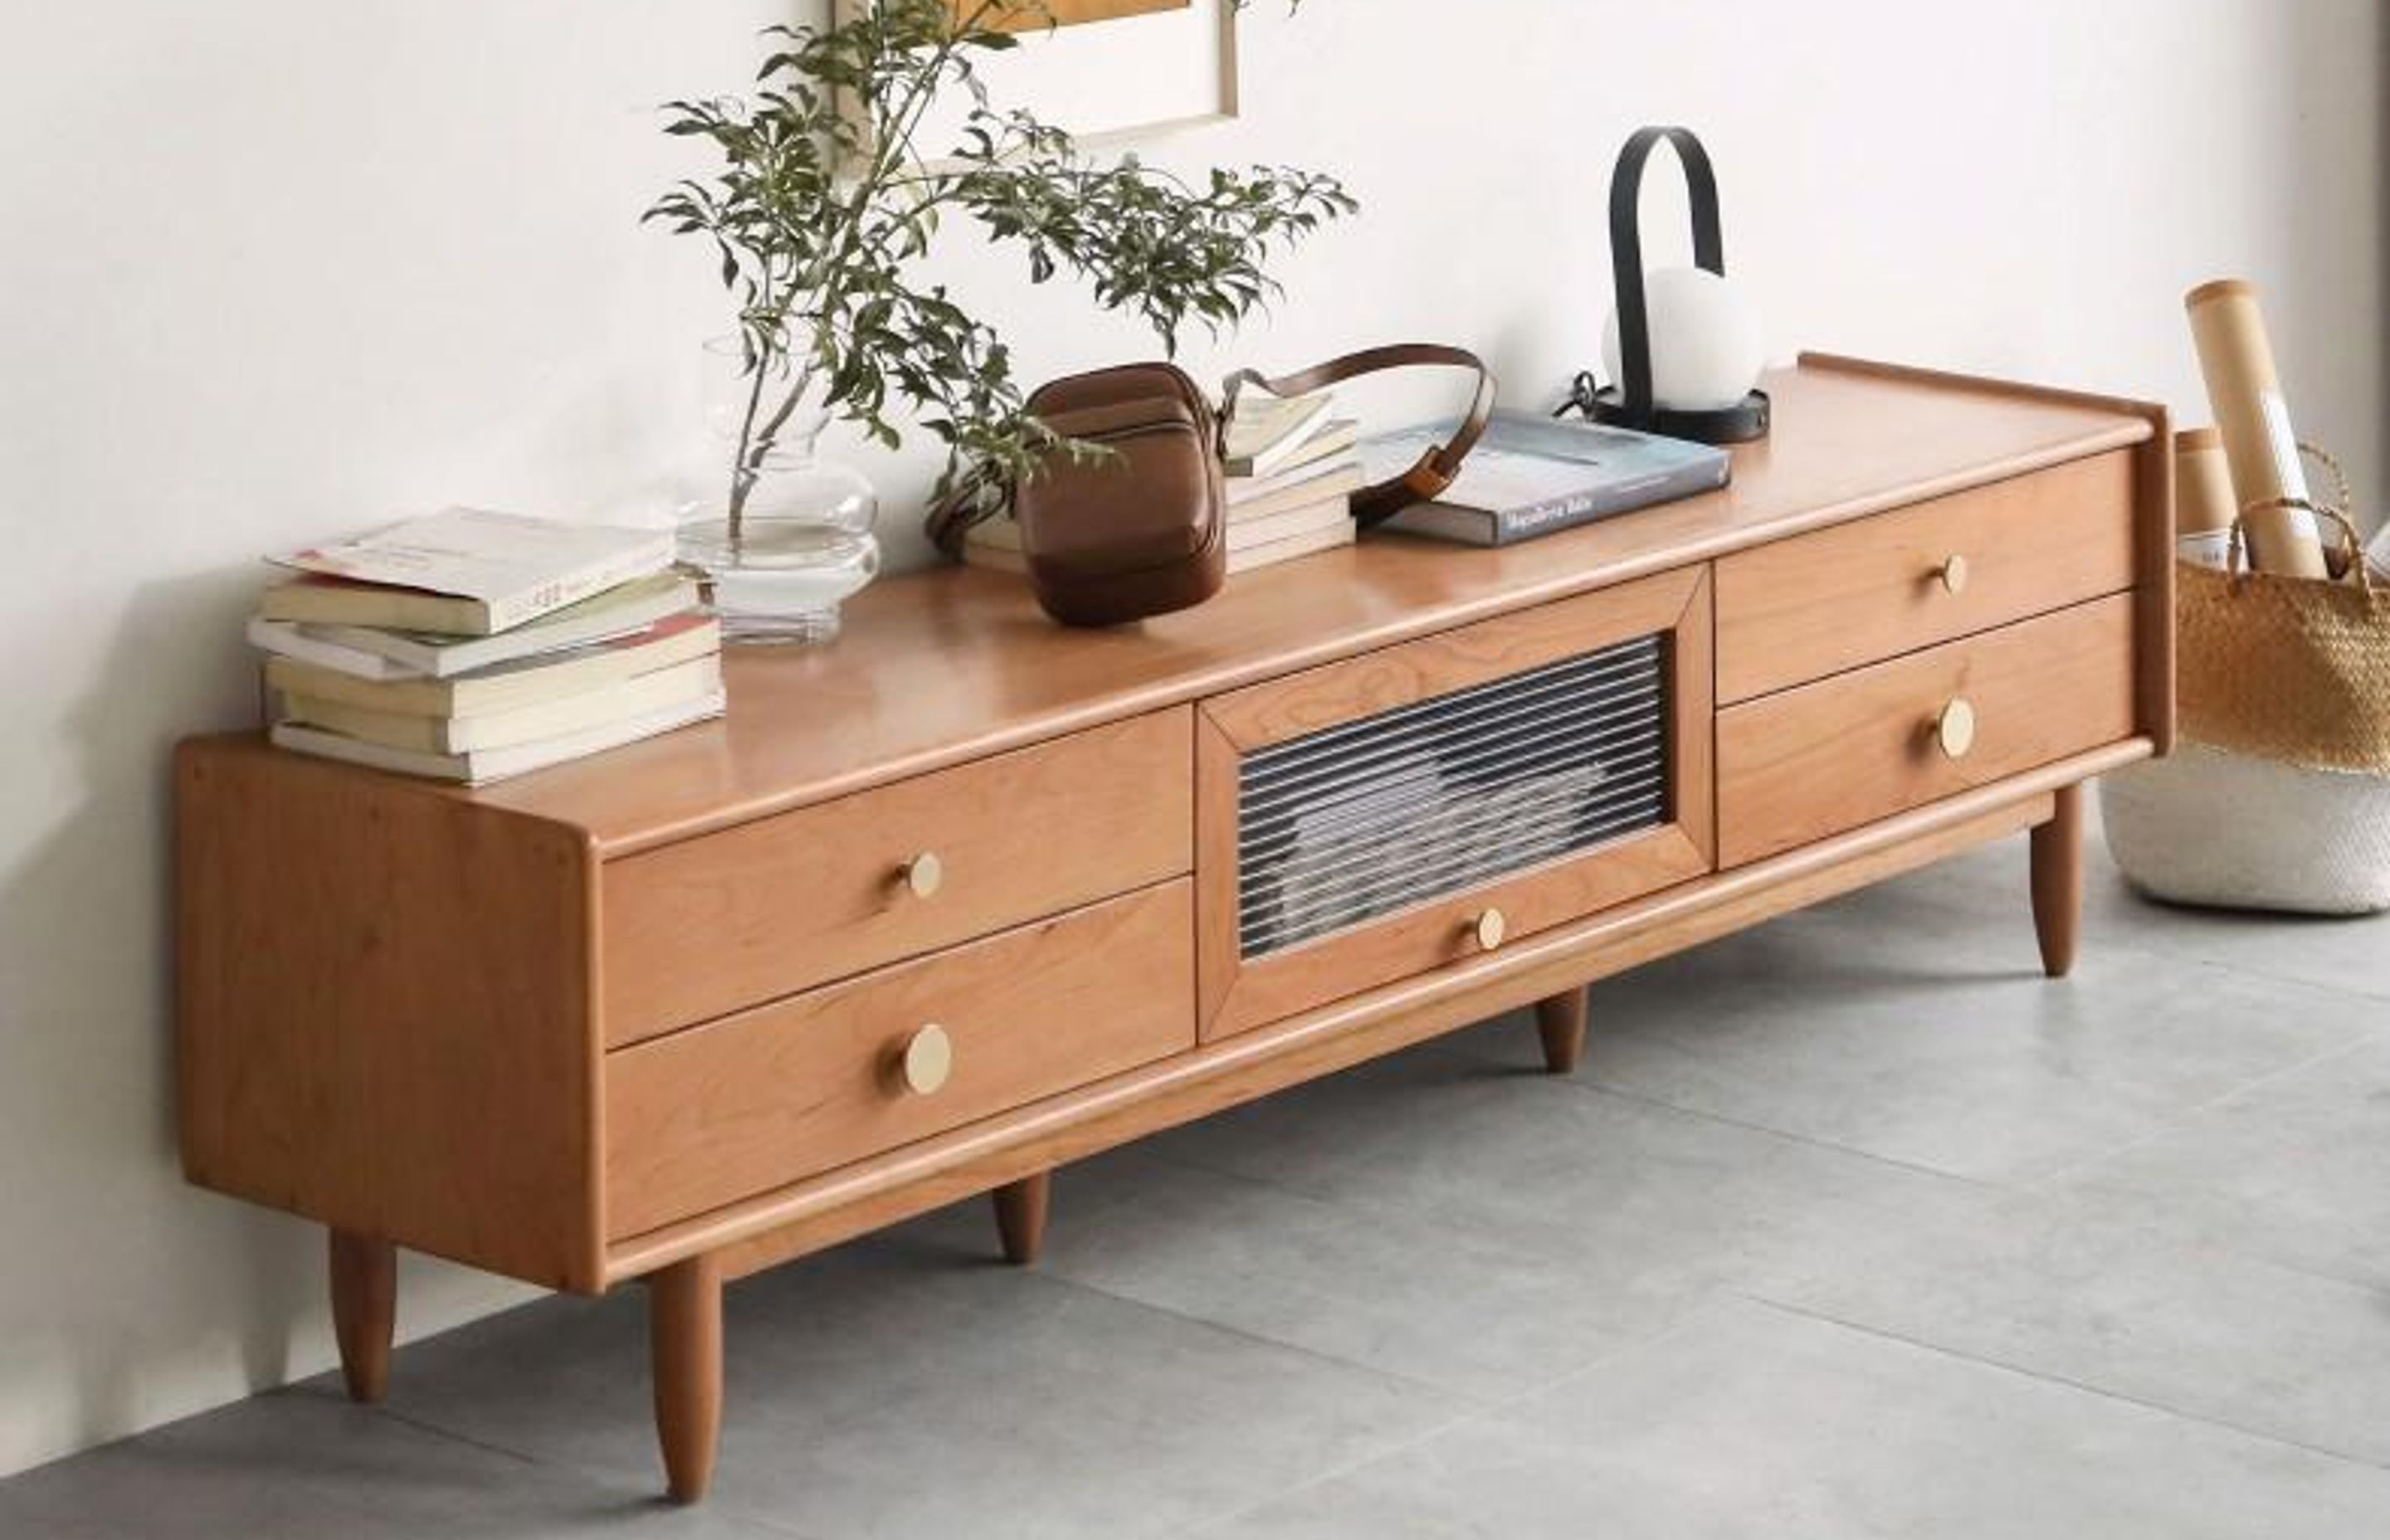 Constructed from 100% solid American cherry hardwood, the Modern TV-Media Stand from Oak Furniture Store is a perfect example of a solid traditional piece anchoring a modern space.